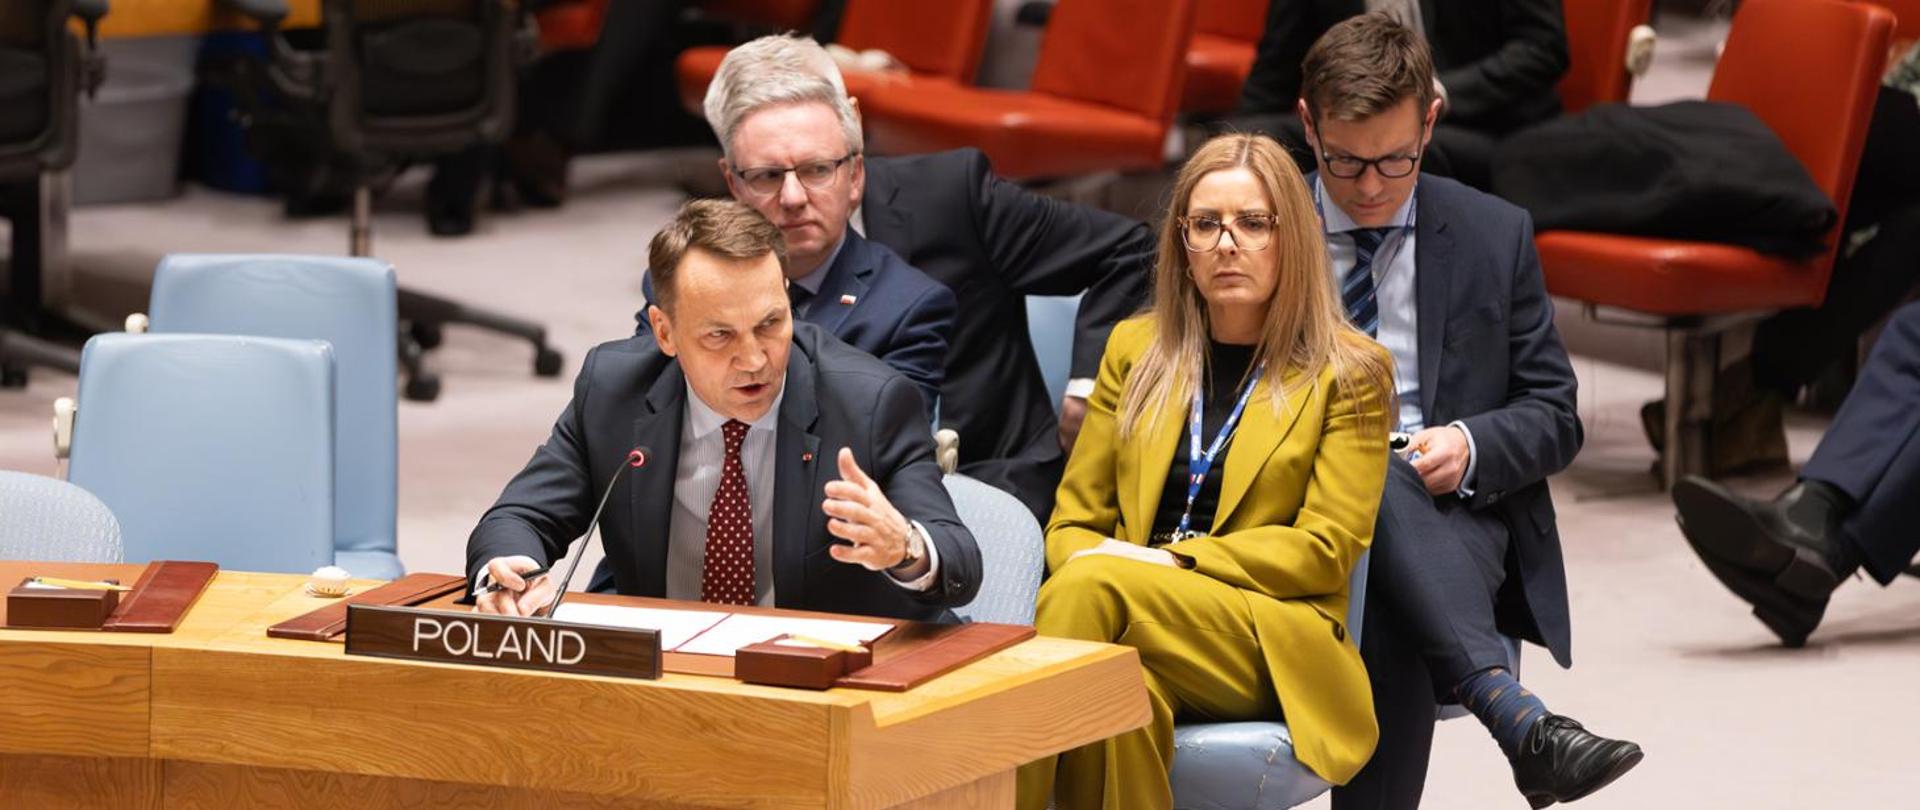 Minister R. Sikorski delivers speech at the UN SC